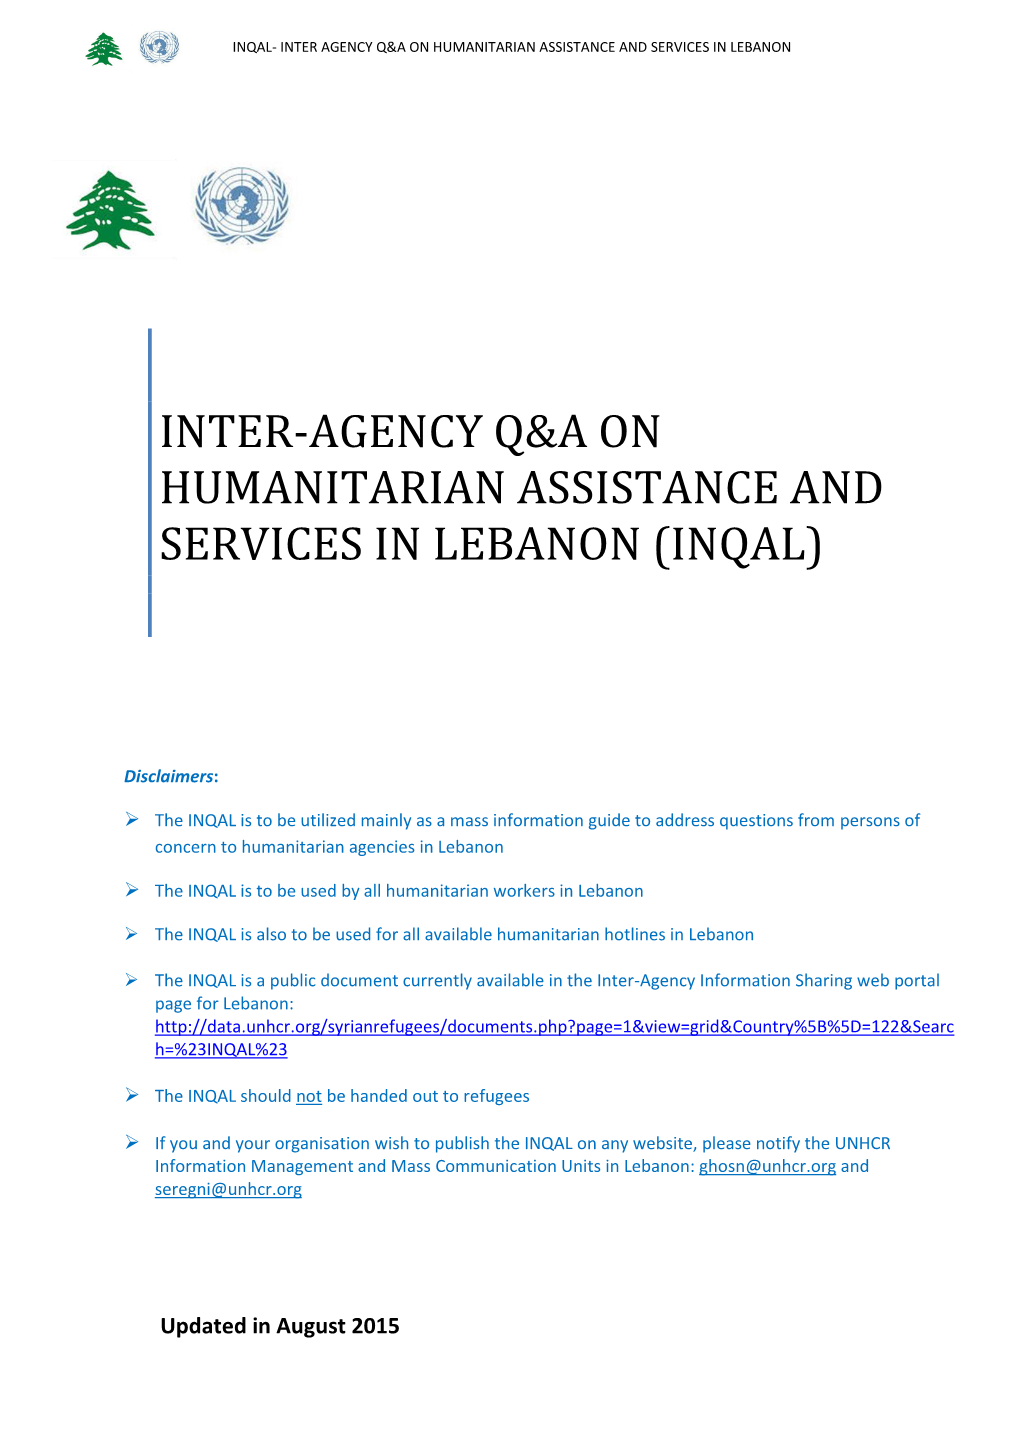 Inter-Agency Q&A on Humanitarian Assistance